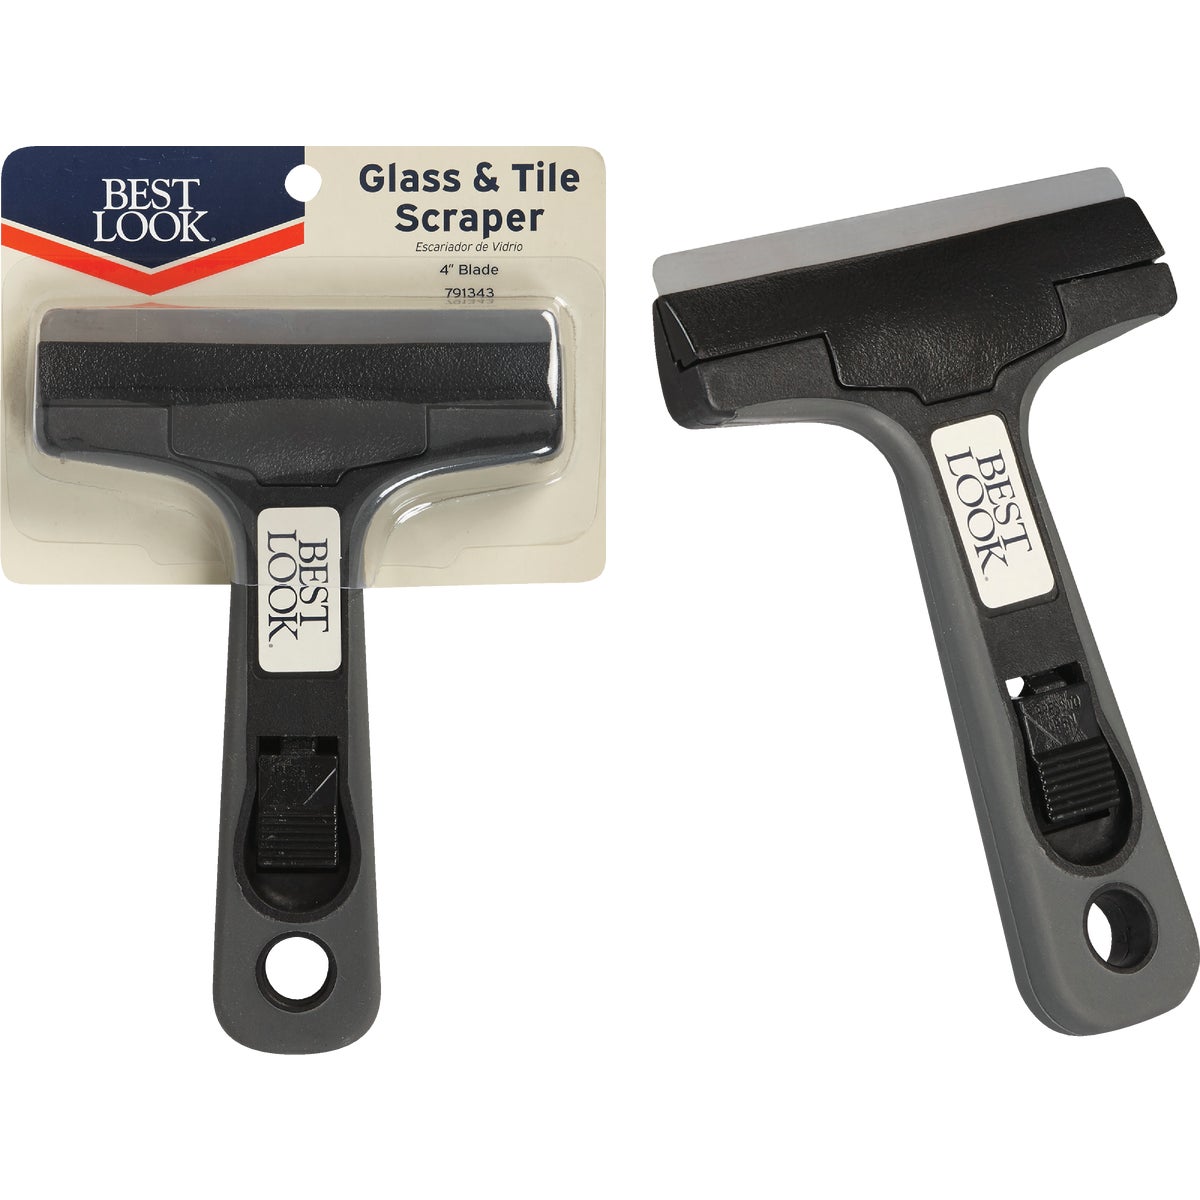 Item 791343, The Glass &amp; Tile Scraper features a comfortable handle and a 4 In.